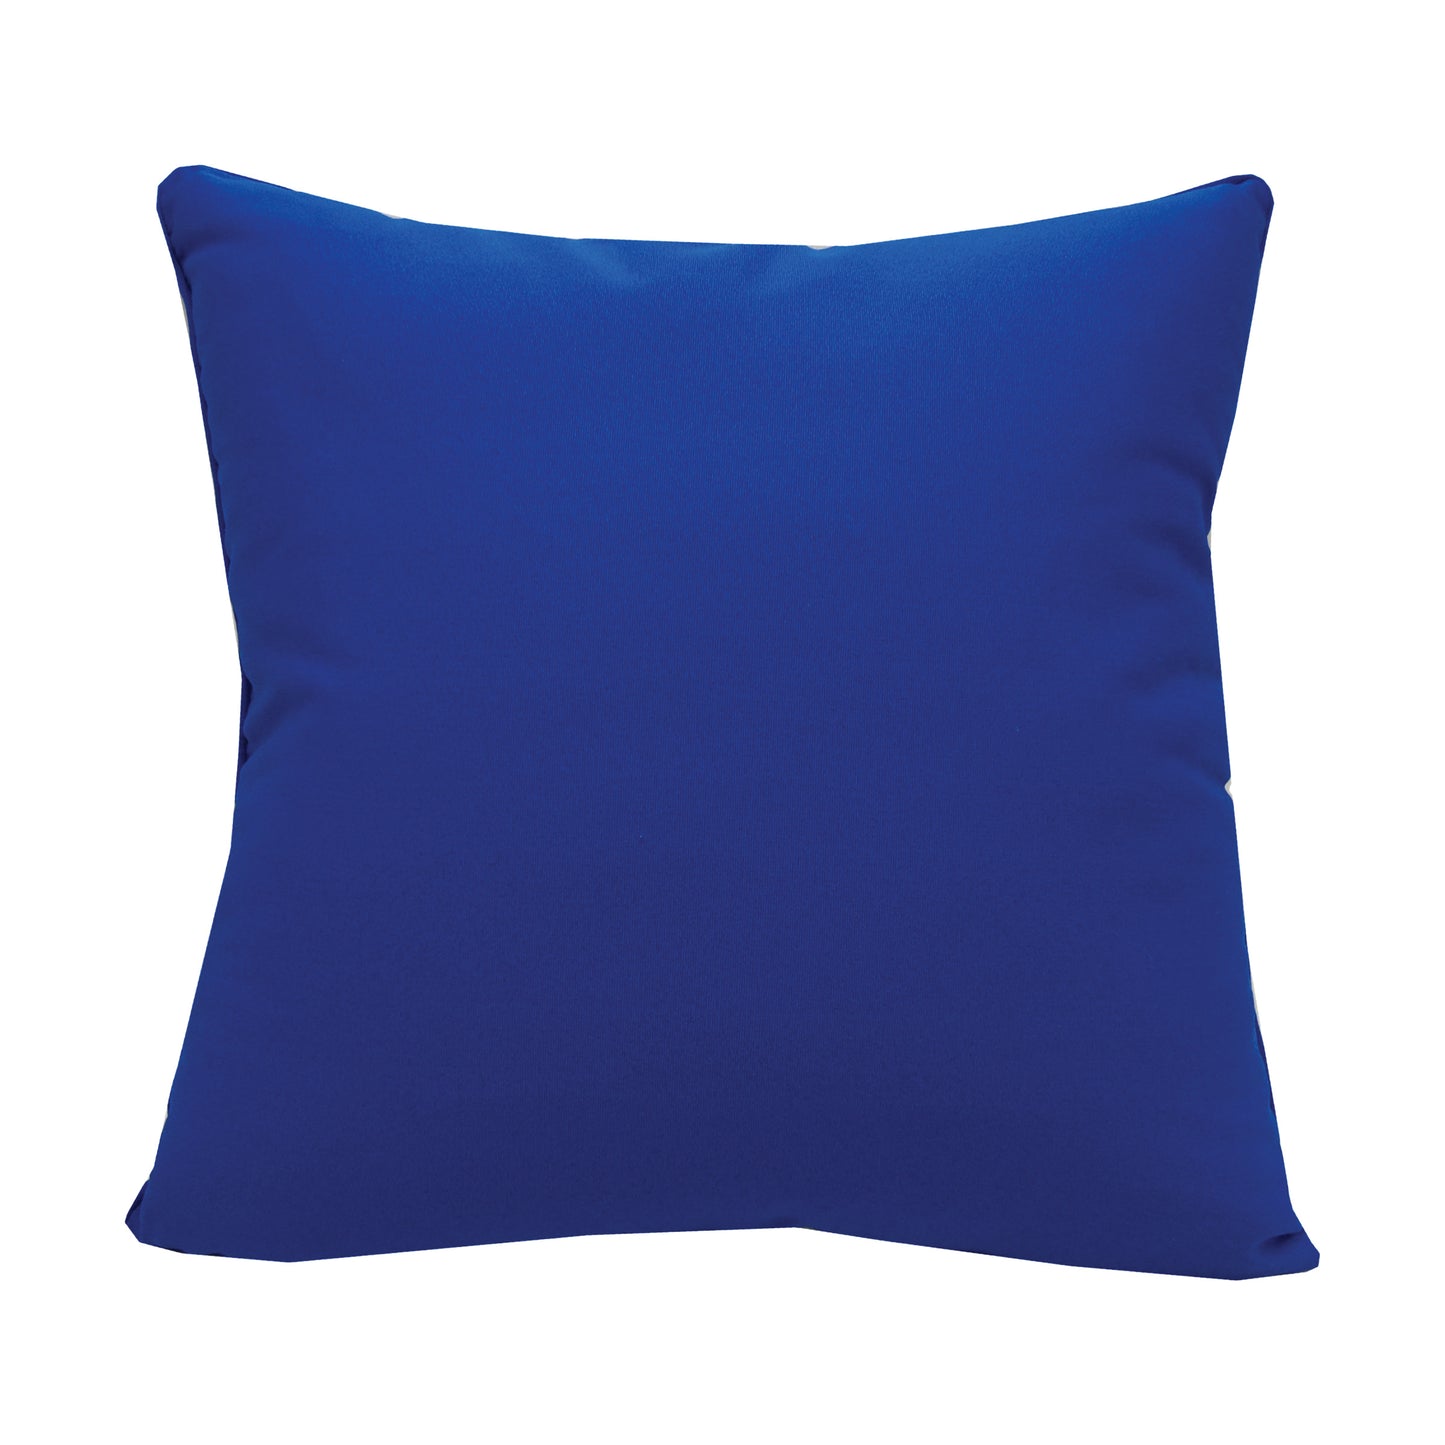 Blue Sea Urchin Embroidered Pillow Back